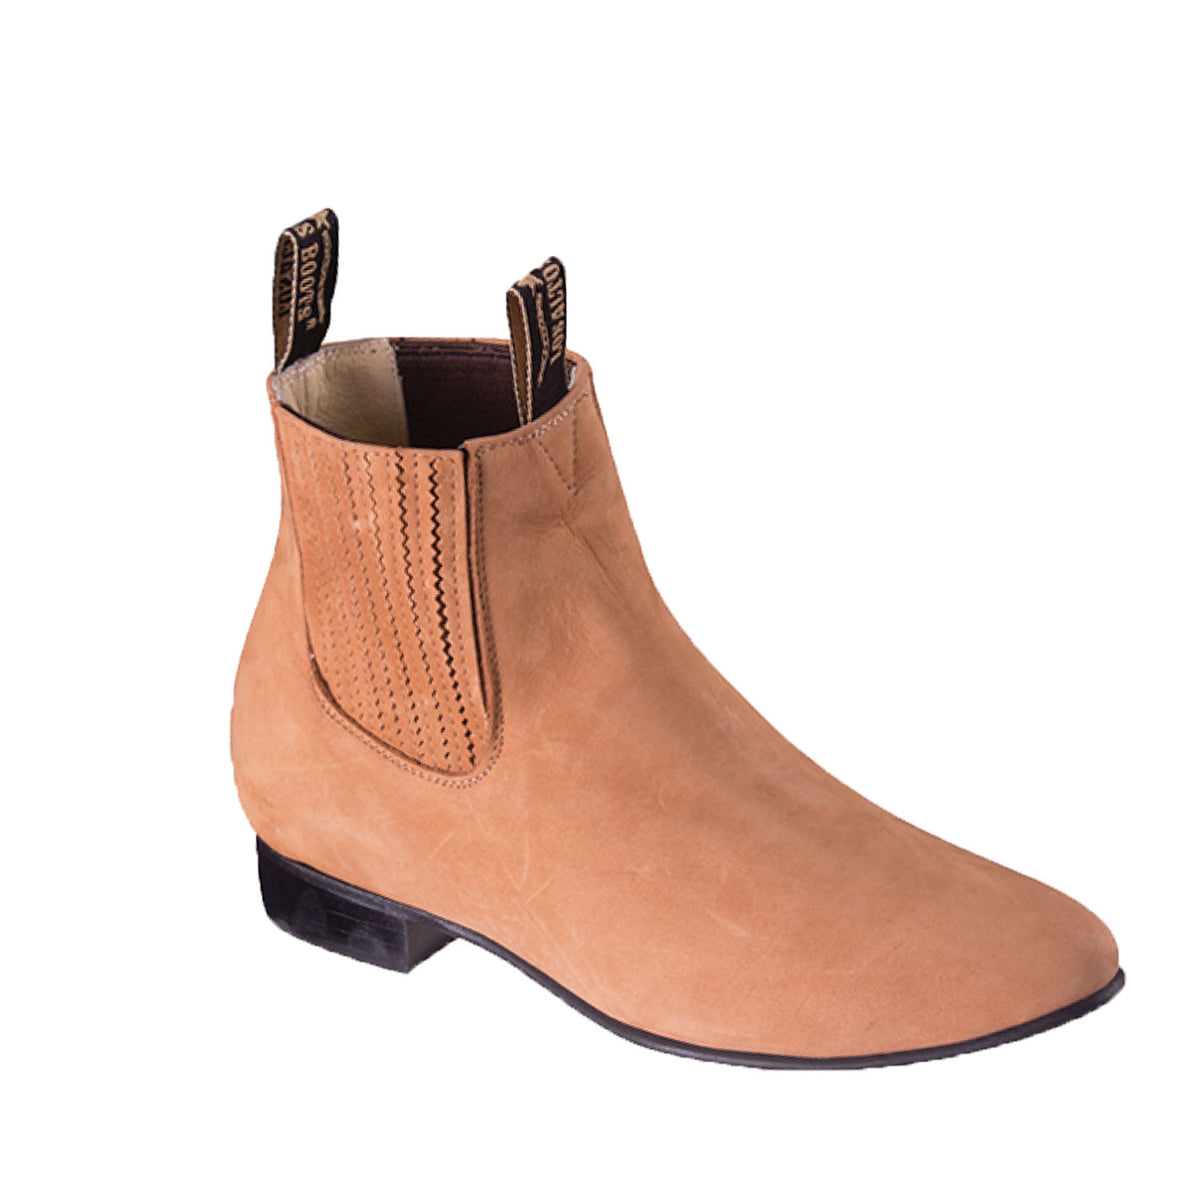 Genuine Suede Leather Short Boot LAB-6163